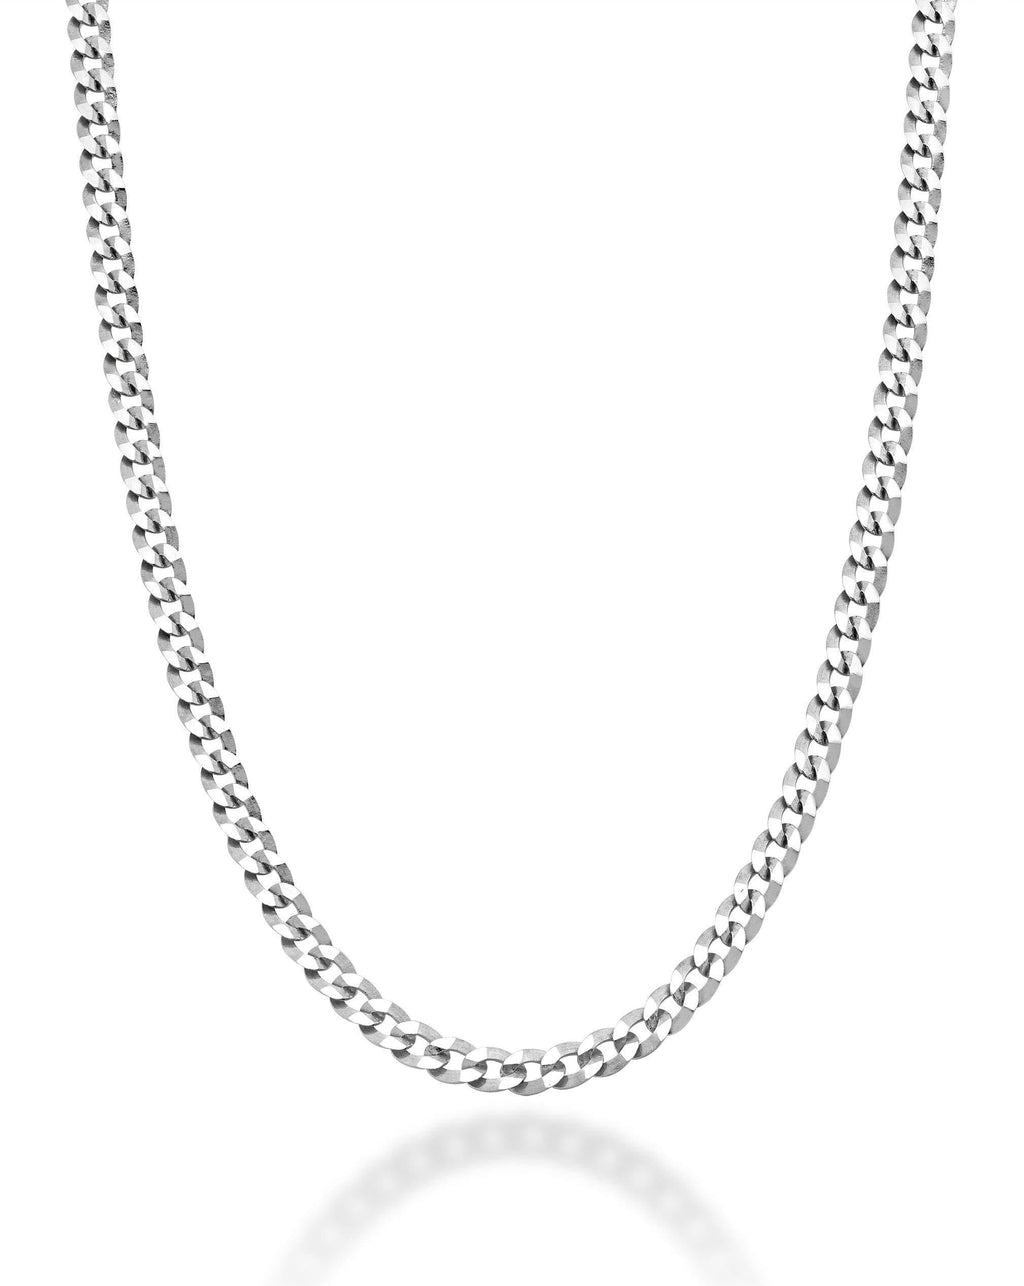 [Australia] - Miabella Solid 925 Sterling Silver Italian 2.5mm Diamond Cut Cuban Link Curb Chain Necklace for Women Men, 16, 18, 20, 22, 24, 26, 30 Inch Made in Italy 16 Inches 